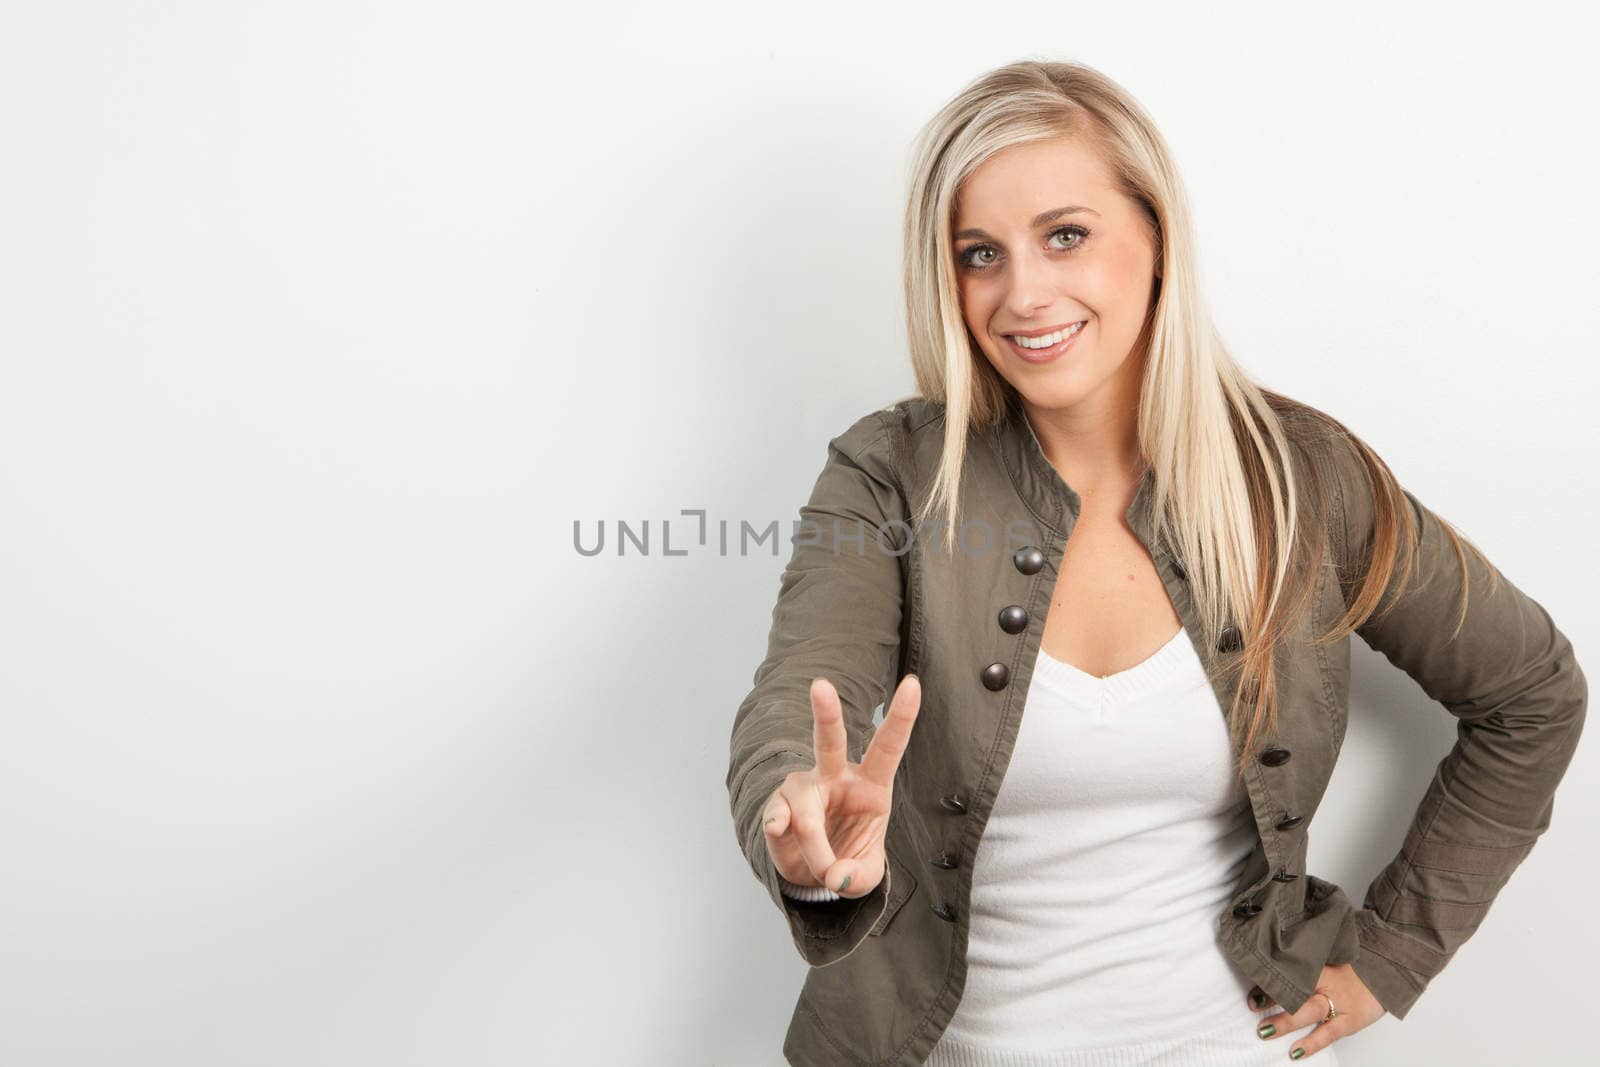 Young blond women smiling and doing a peace sign by Izaphoto